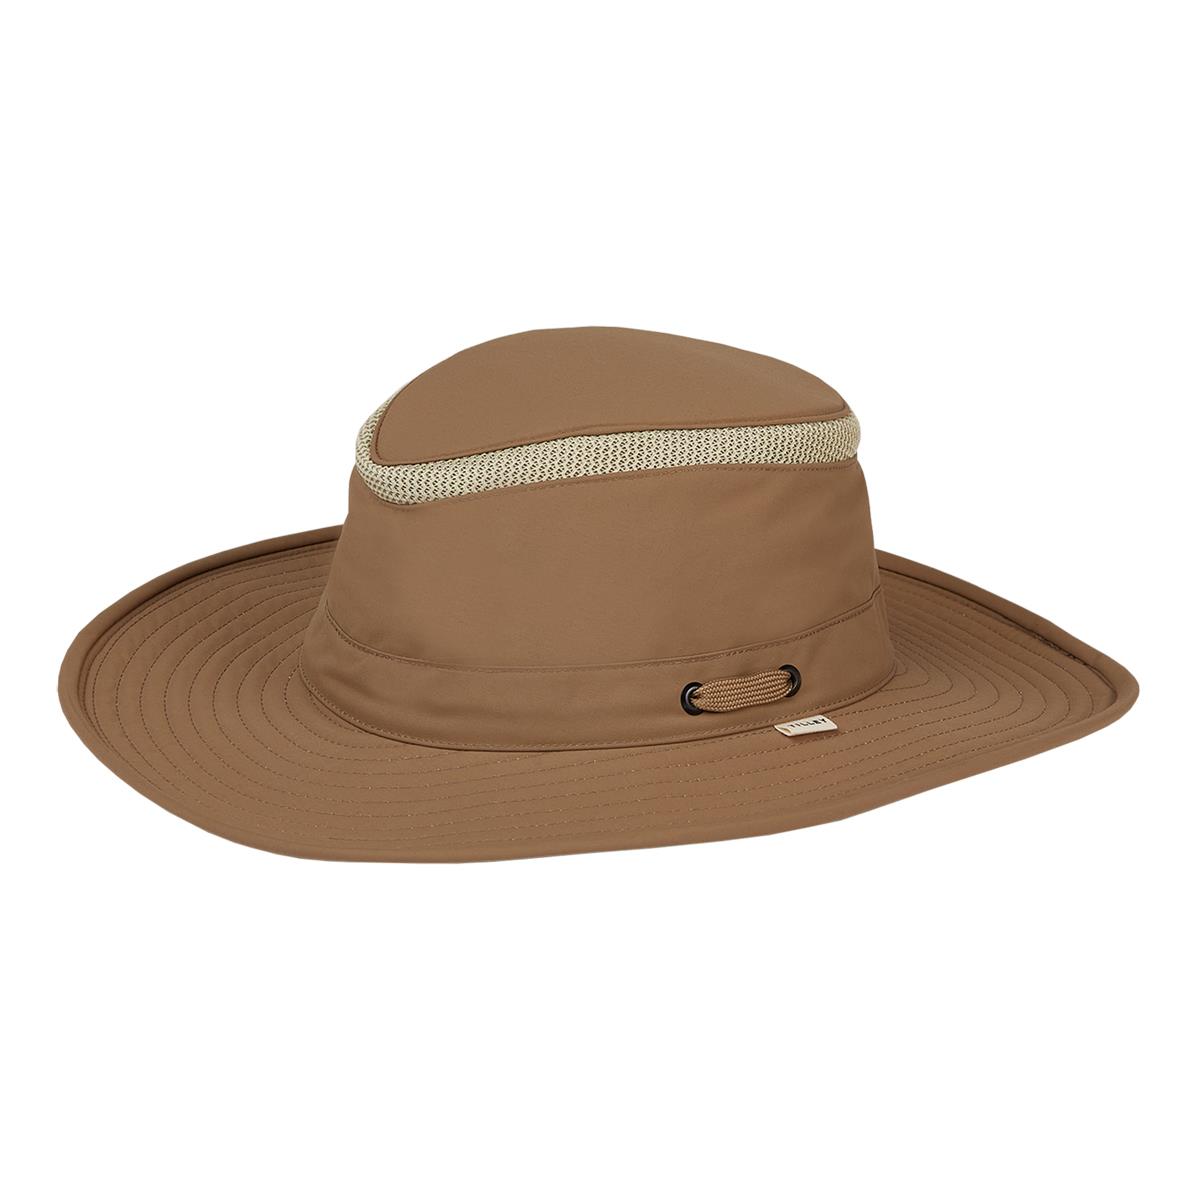 What is the purpose of the Tilley Airflo Hat?